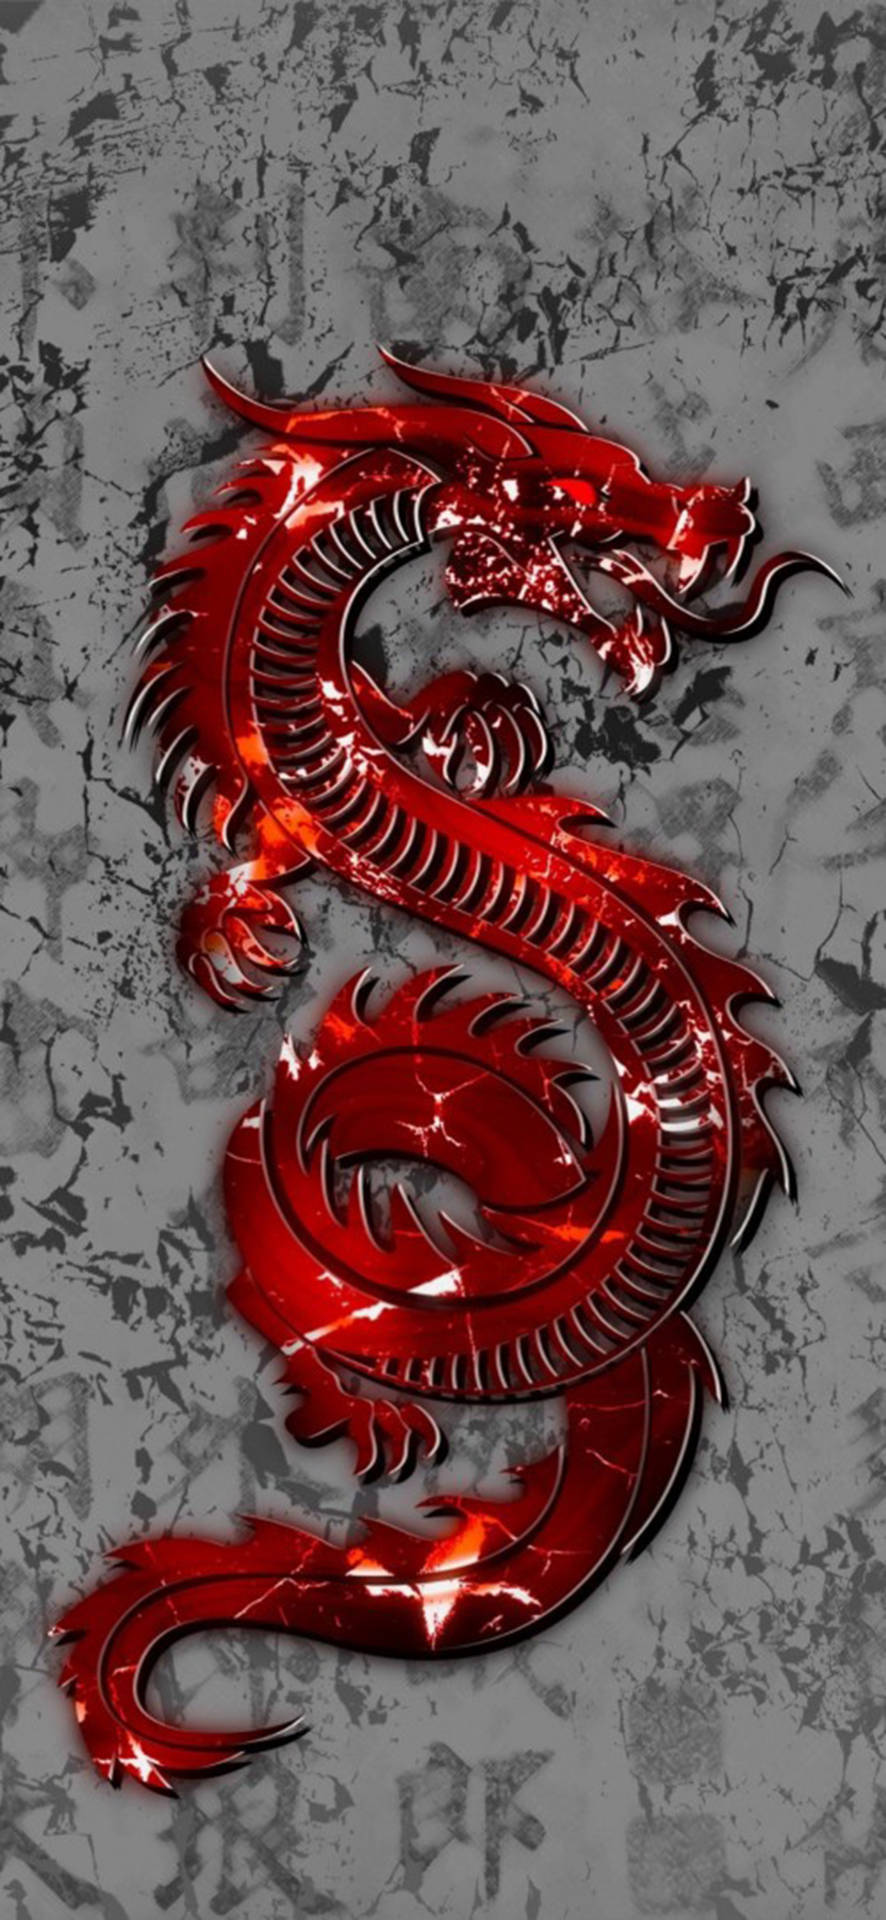 Red Dragon iPhone Wallpaper with high-resolution 1080x1920 pixel. You can use this wallpaper for your iPhone 5, 6, 7, 8, X, XS, XR backgrounds, Mobile Screensaver, or iPad Lock Screen - Dragon